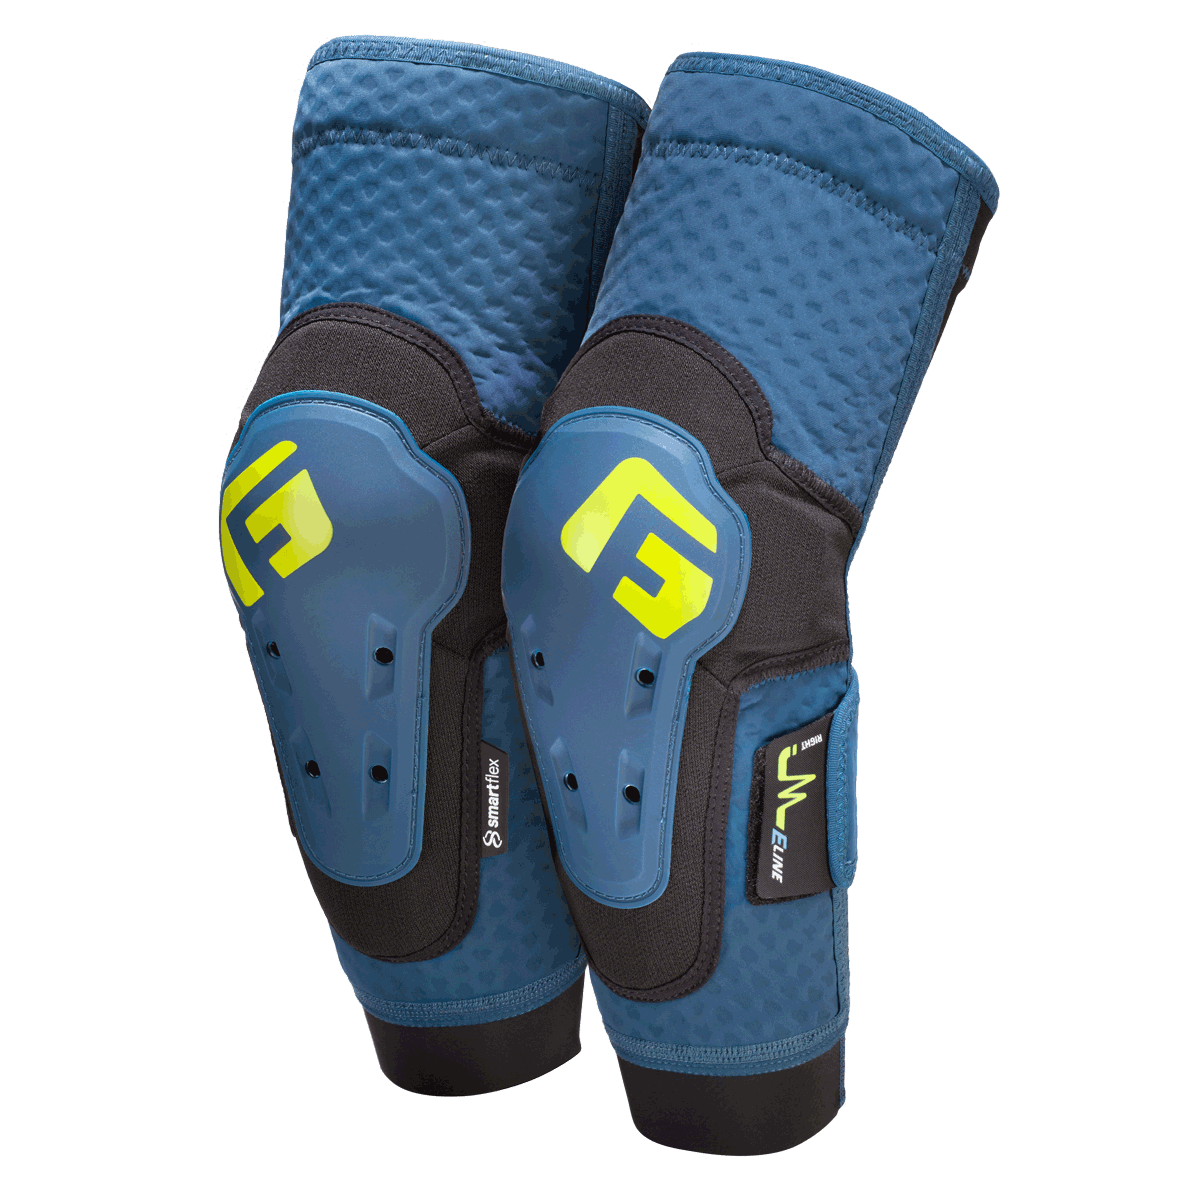 E-Line Elbow guards elbow pads enduro downhill gravity mountain bike riding protection gear